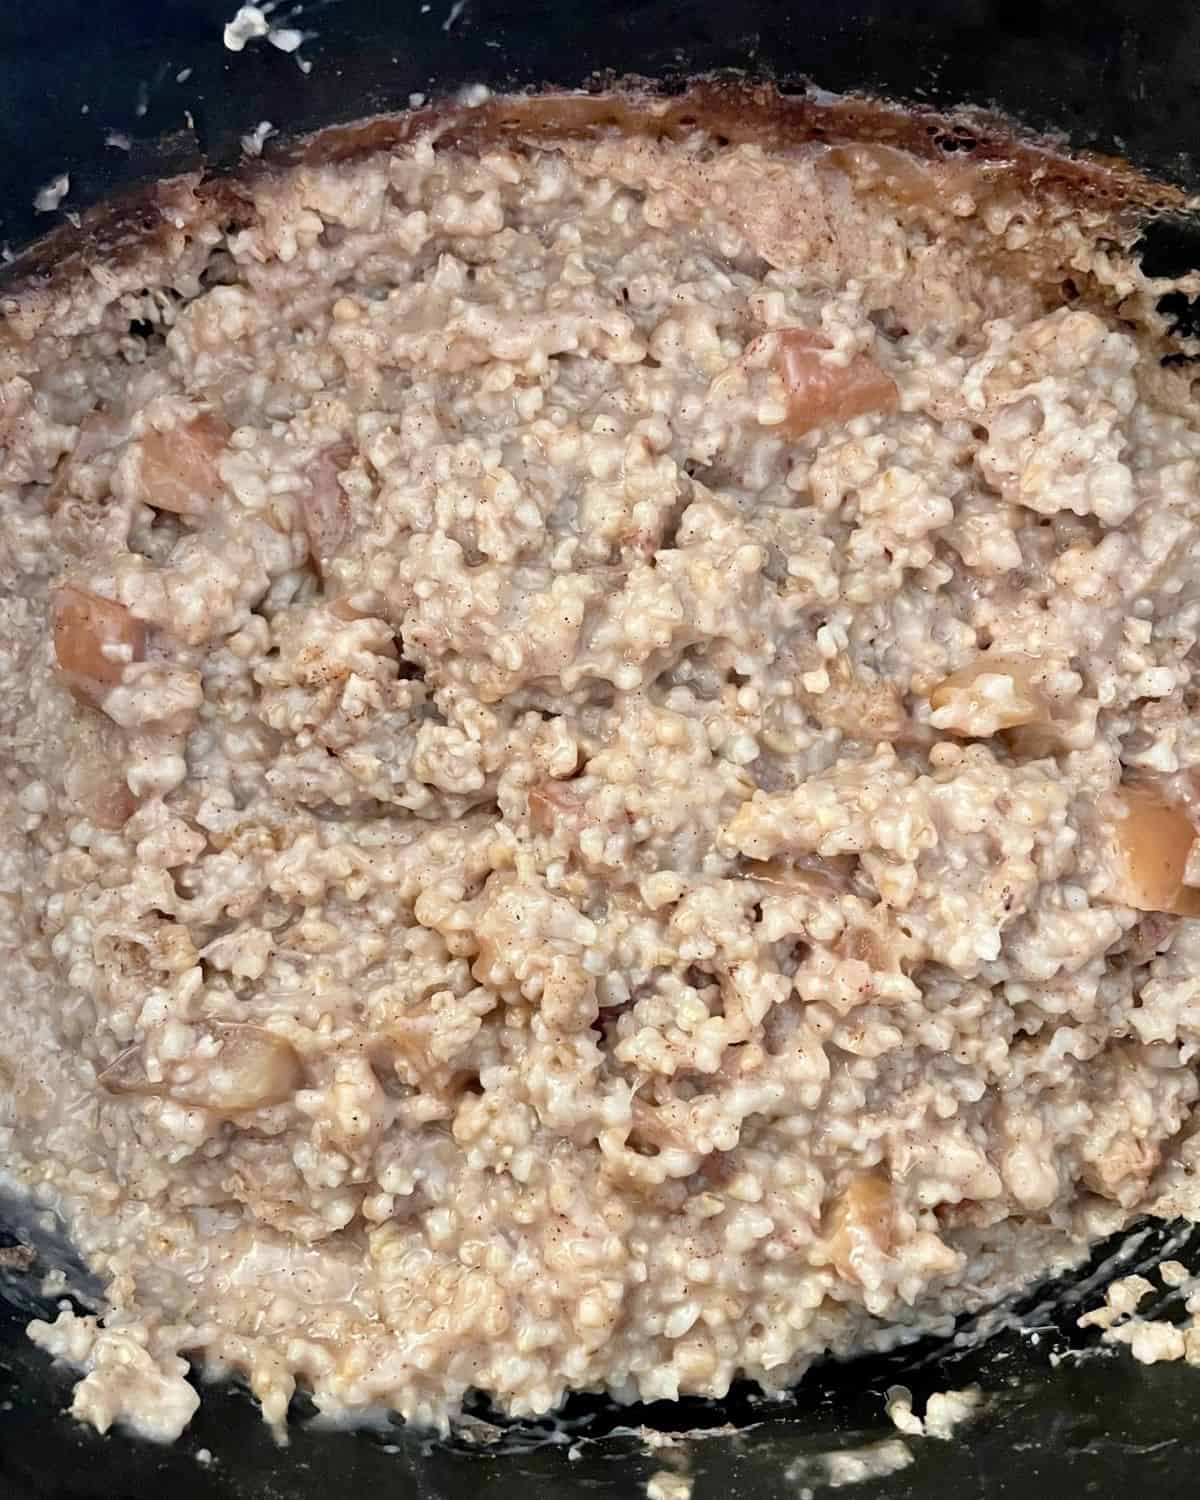 Cooked oatmeal in the slow cooker.